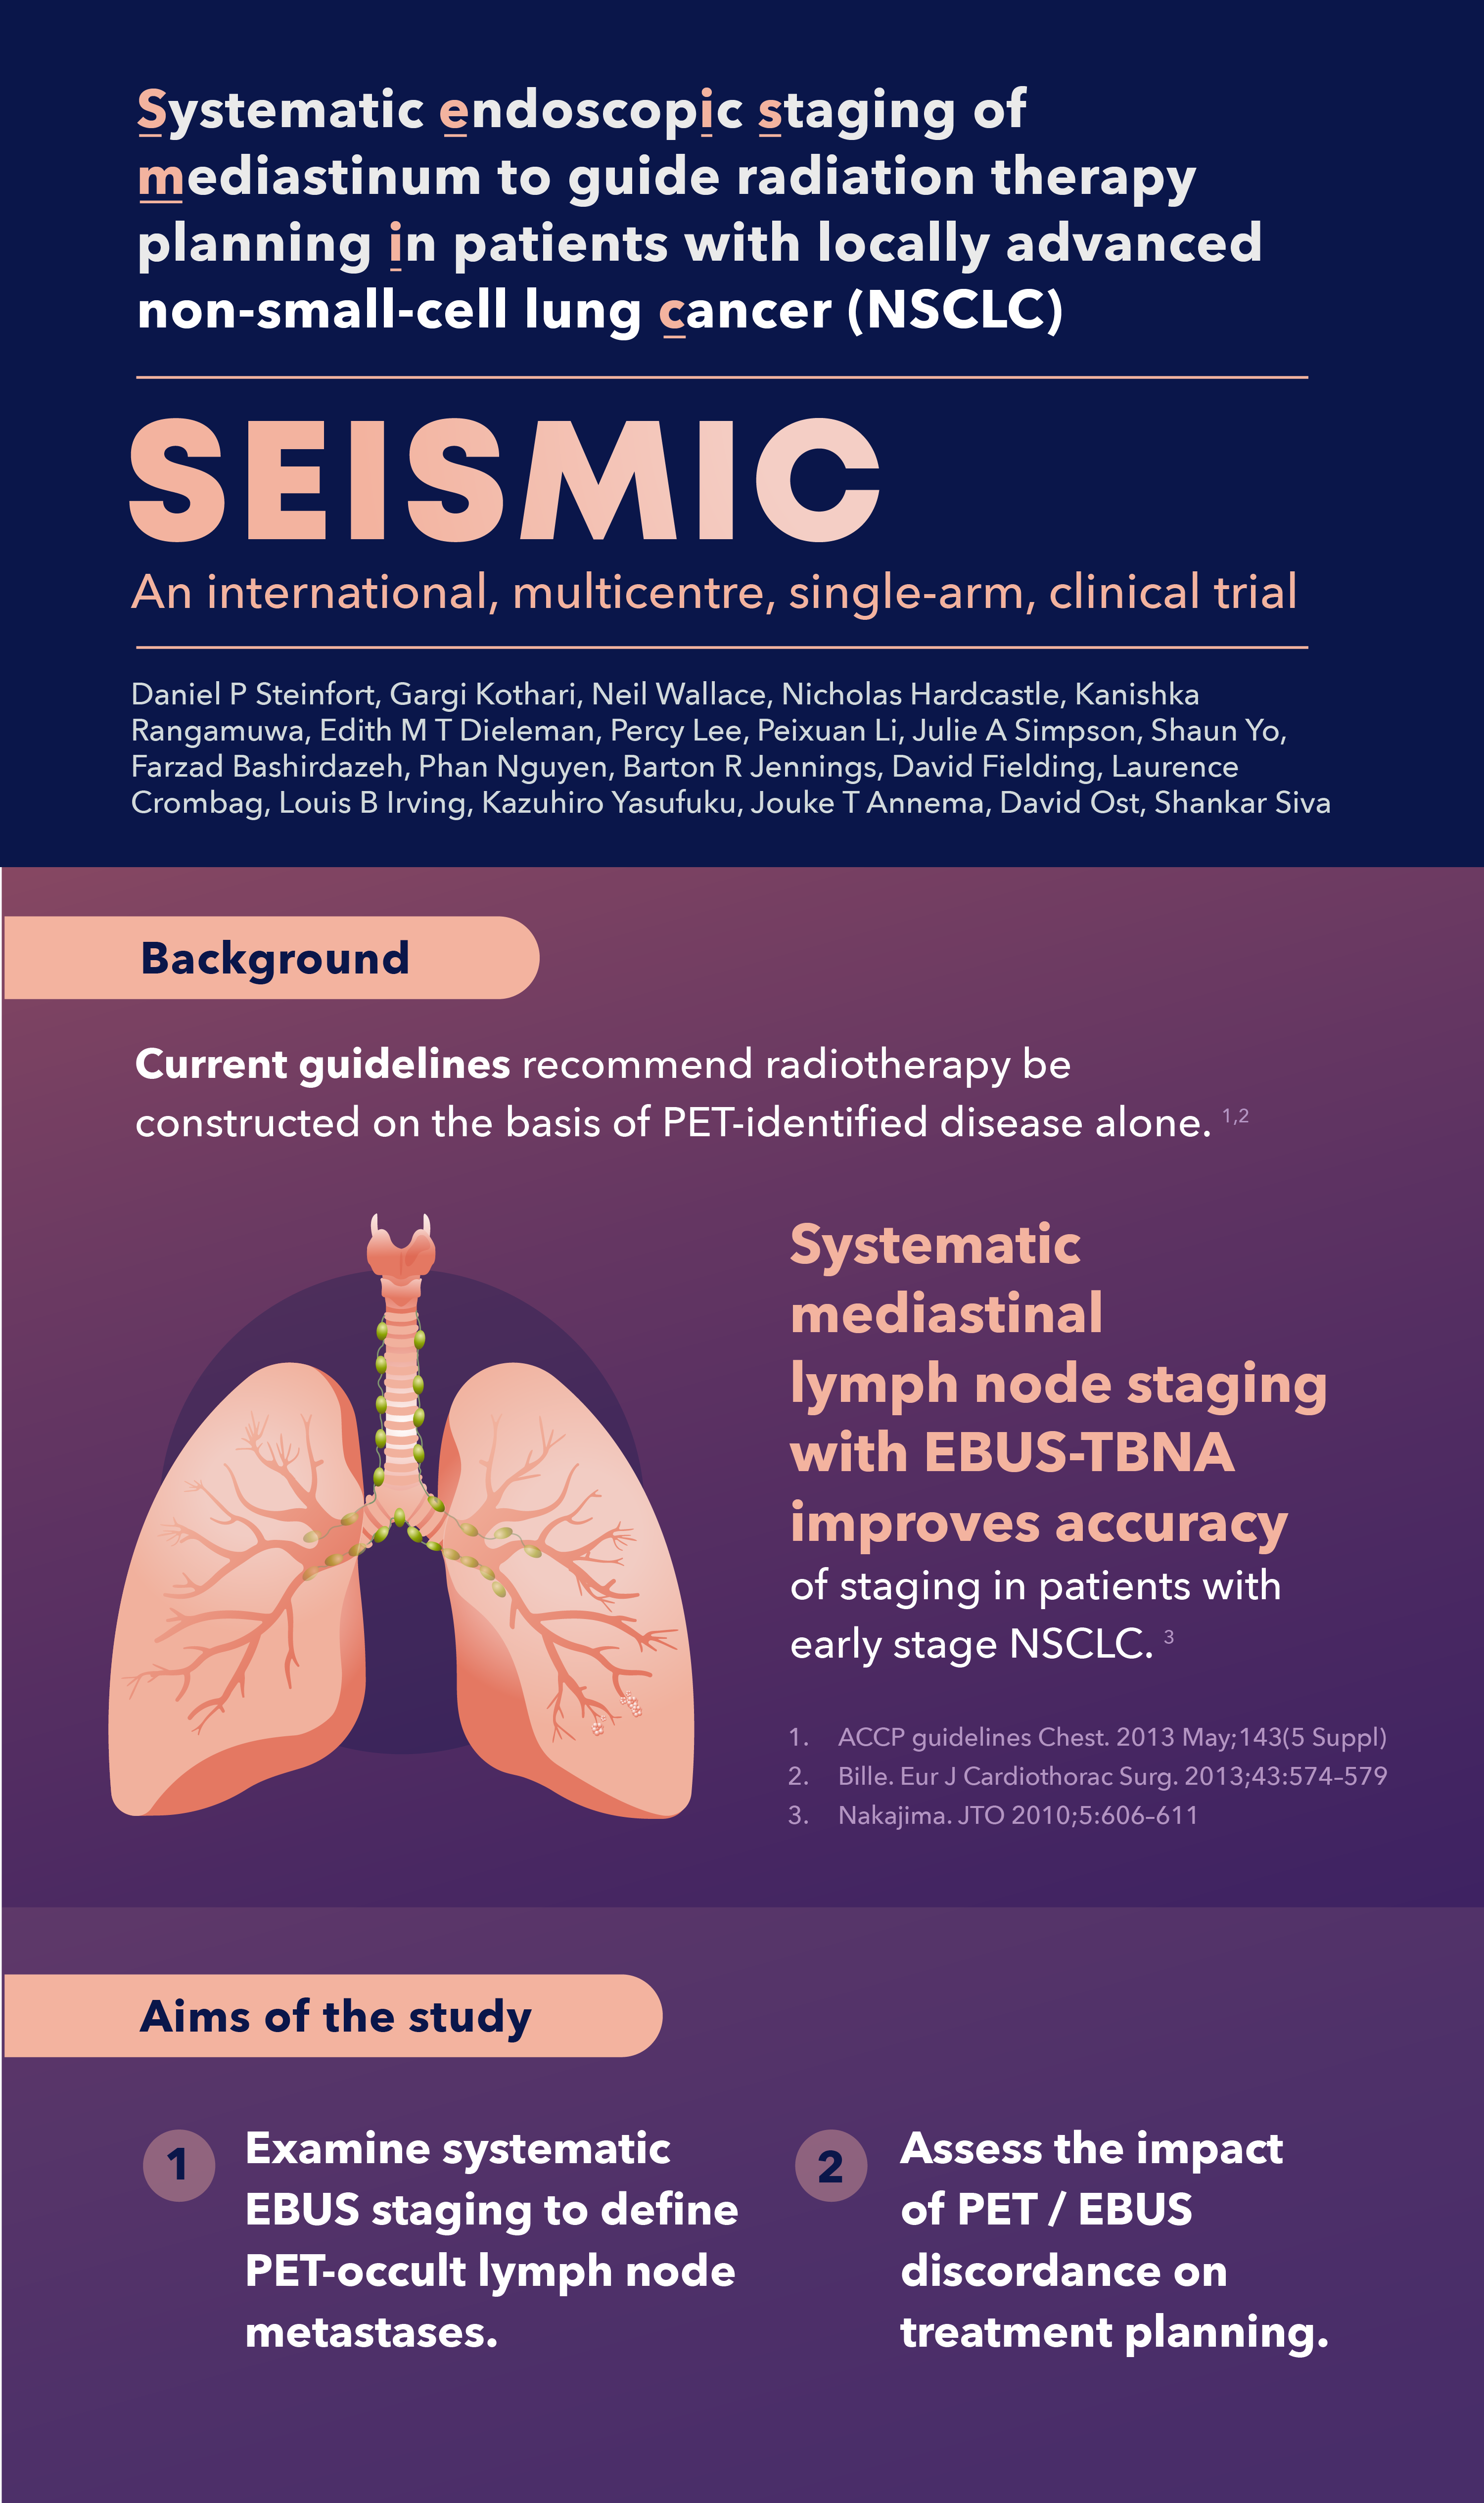 SEISMIC clinical trial (lung cancer research)